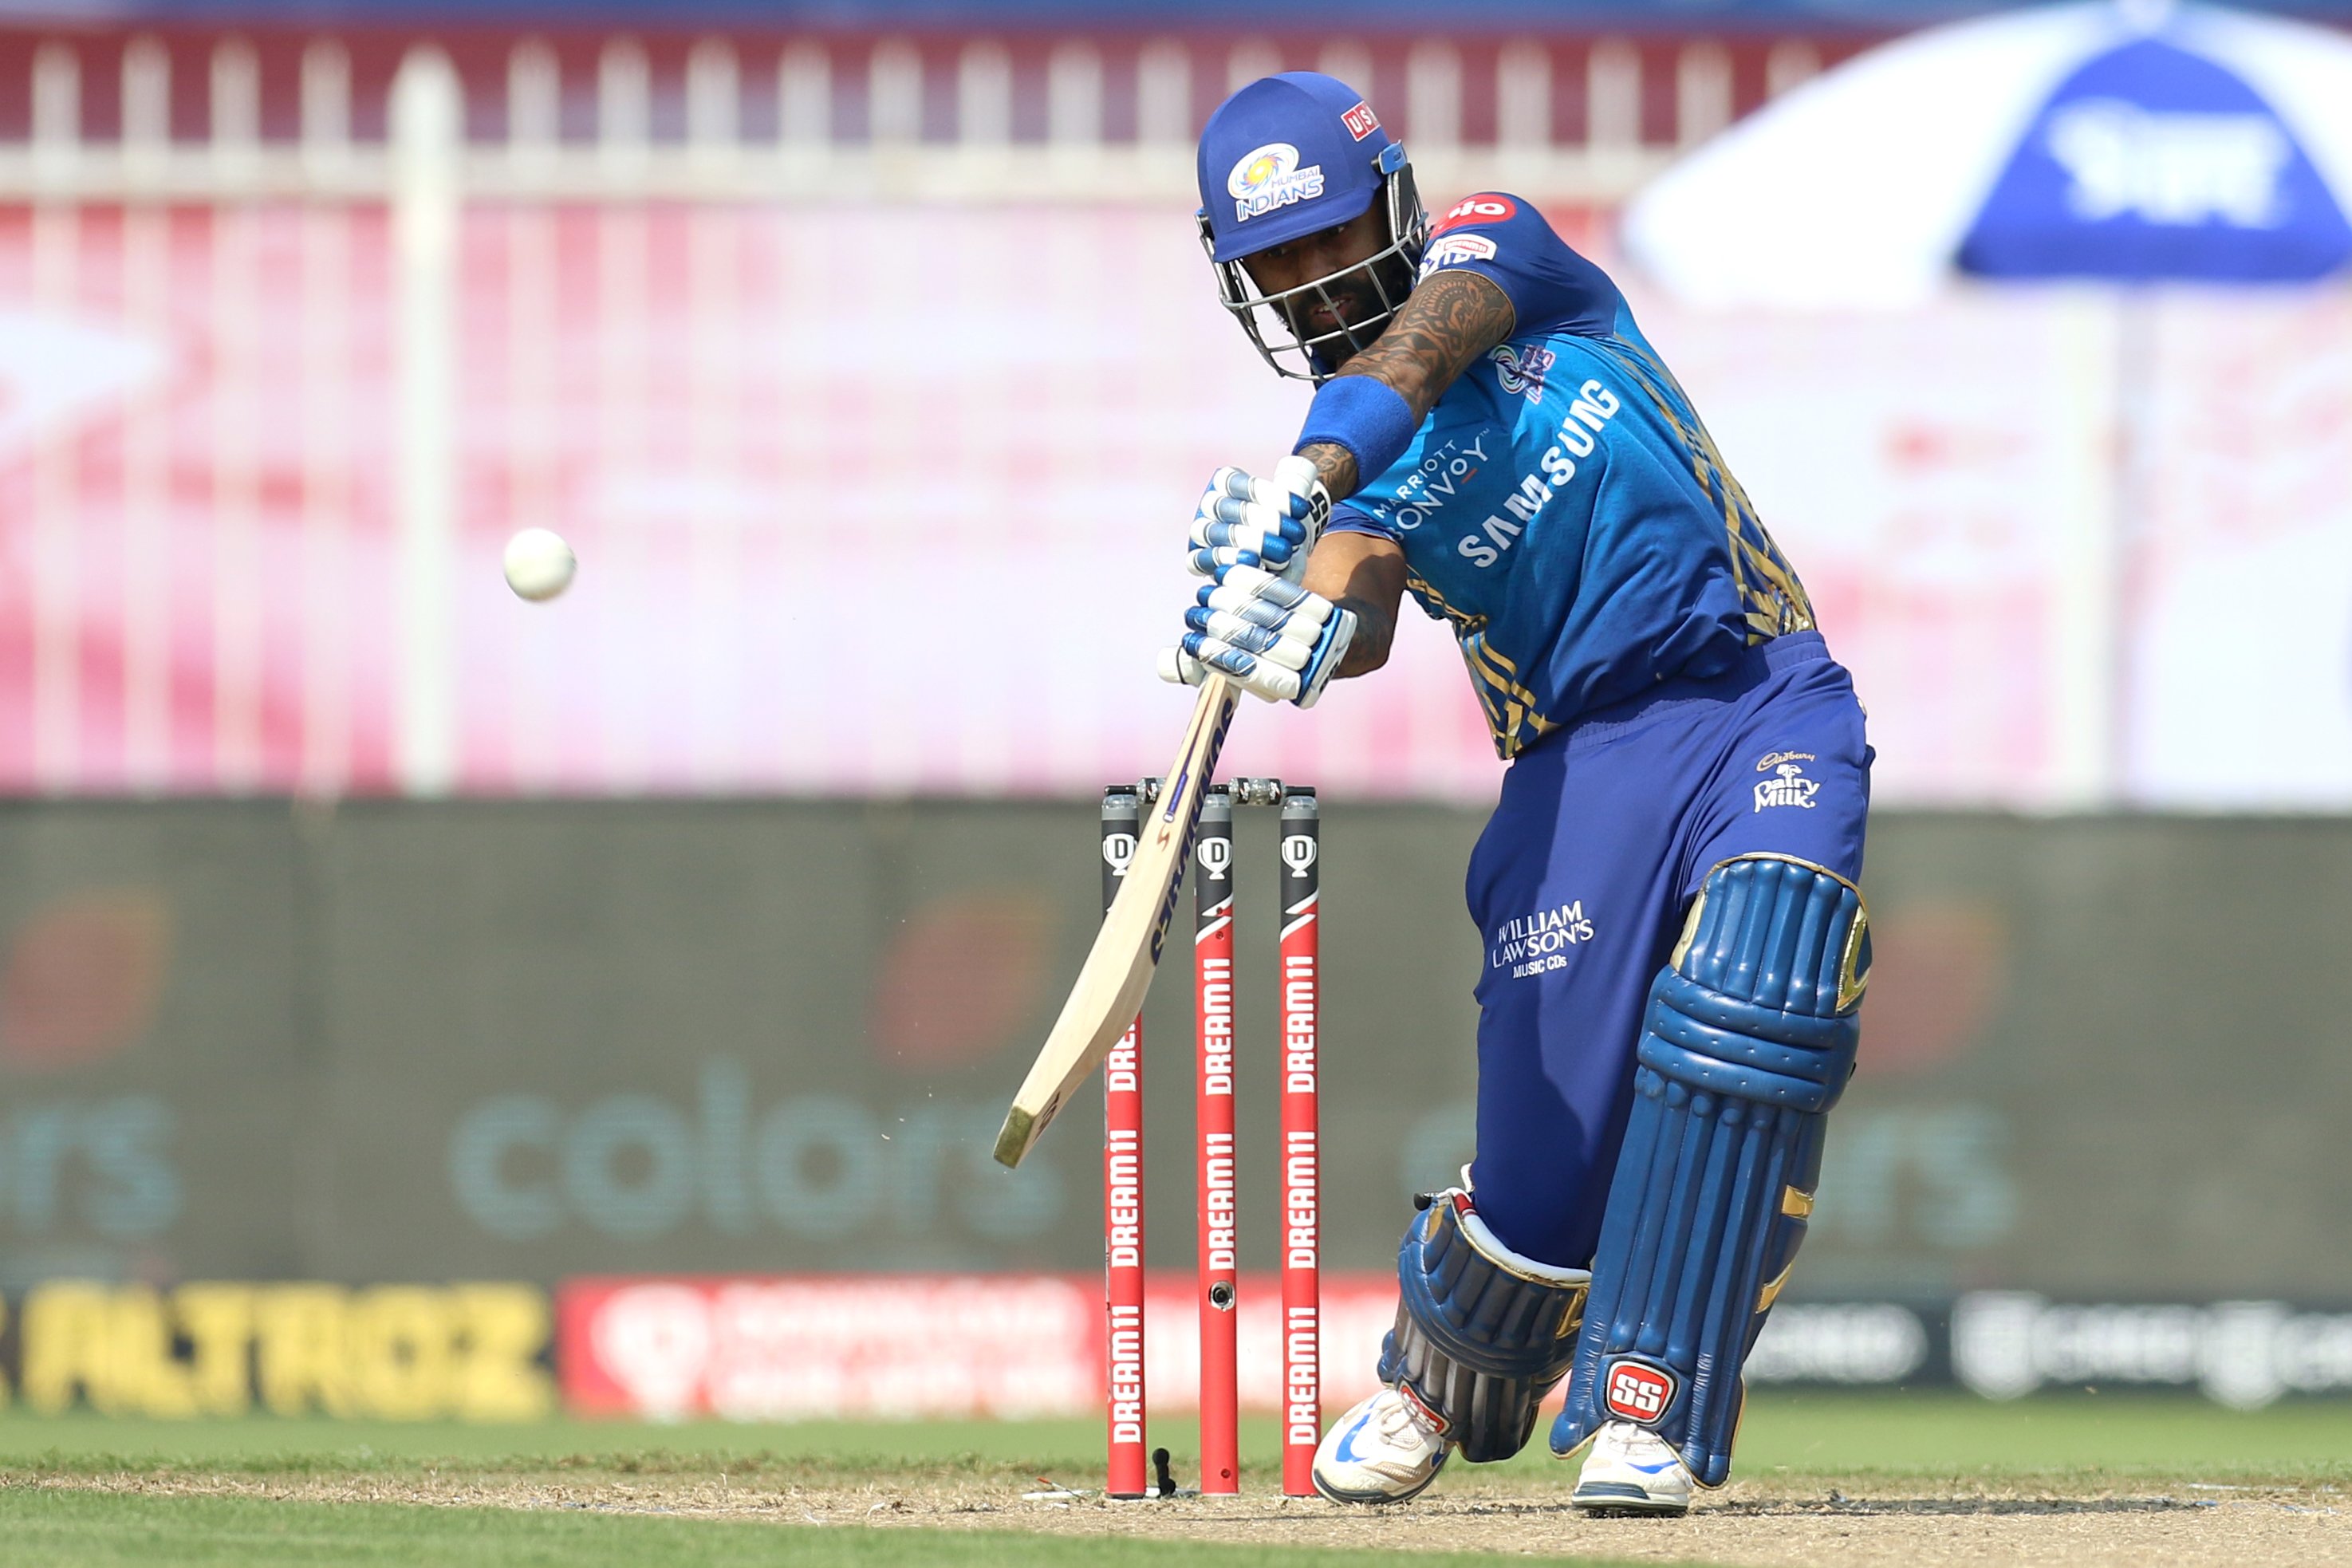 Suryakumar Yadav impressed one and all with his maturity in batting | BCCI/IPL